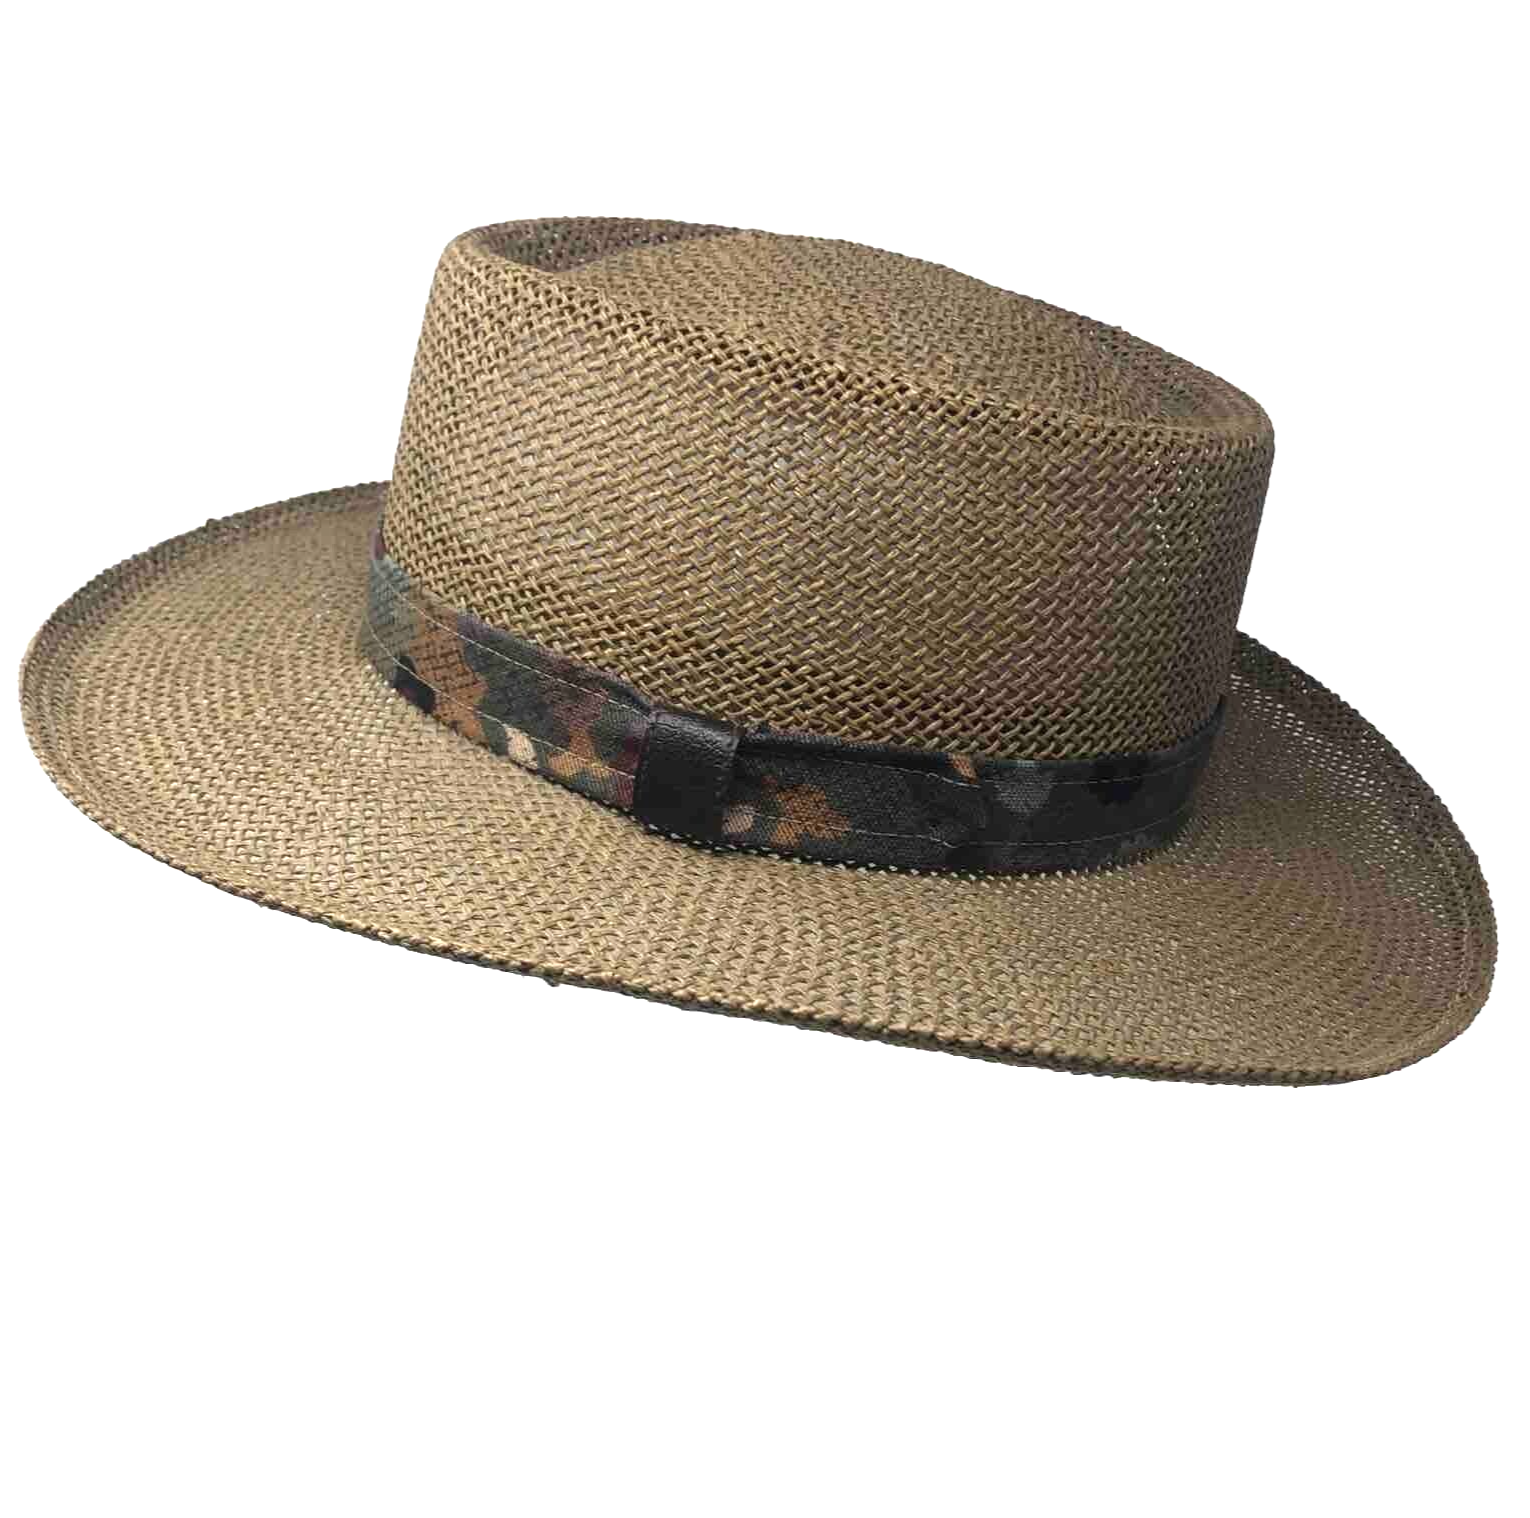 Primary image for Bollman Stiff Straw Hat Size L Multicolor Fabric Band Pinched Center Fedora USA